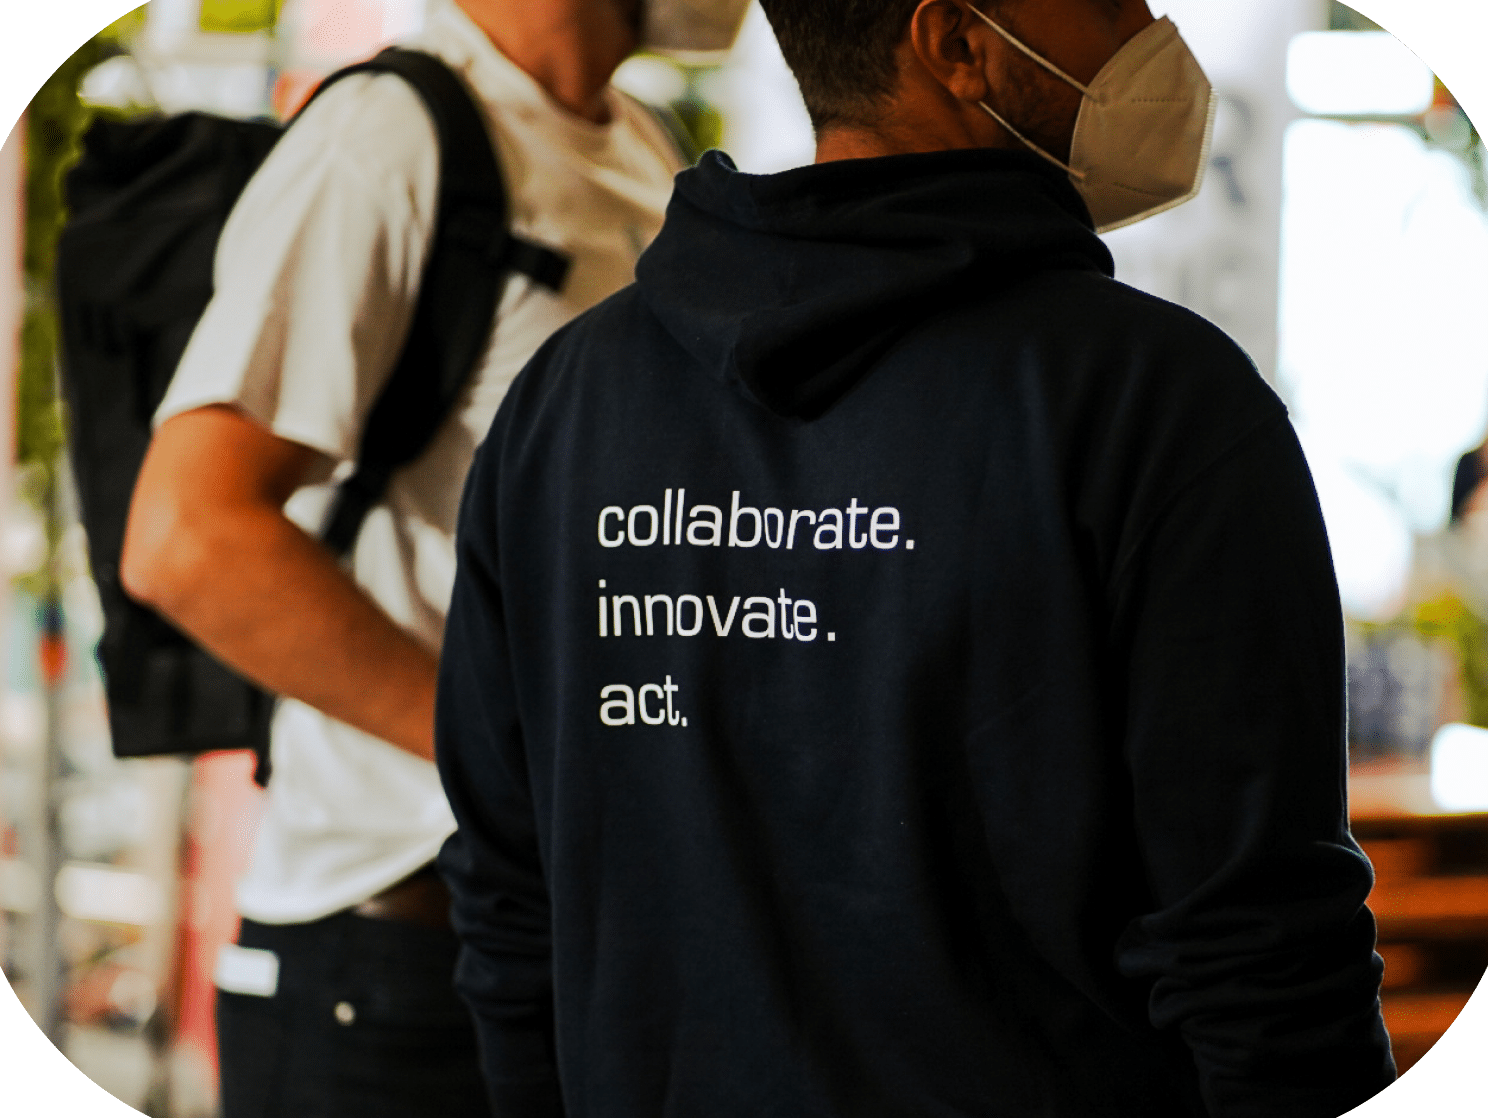 Collaborate, innovate, act - Impact Festival